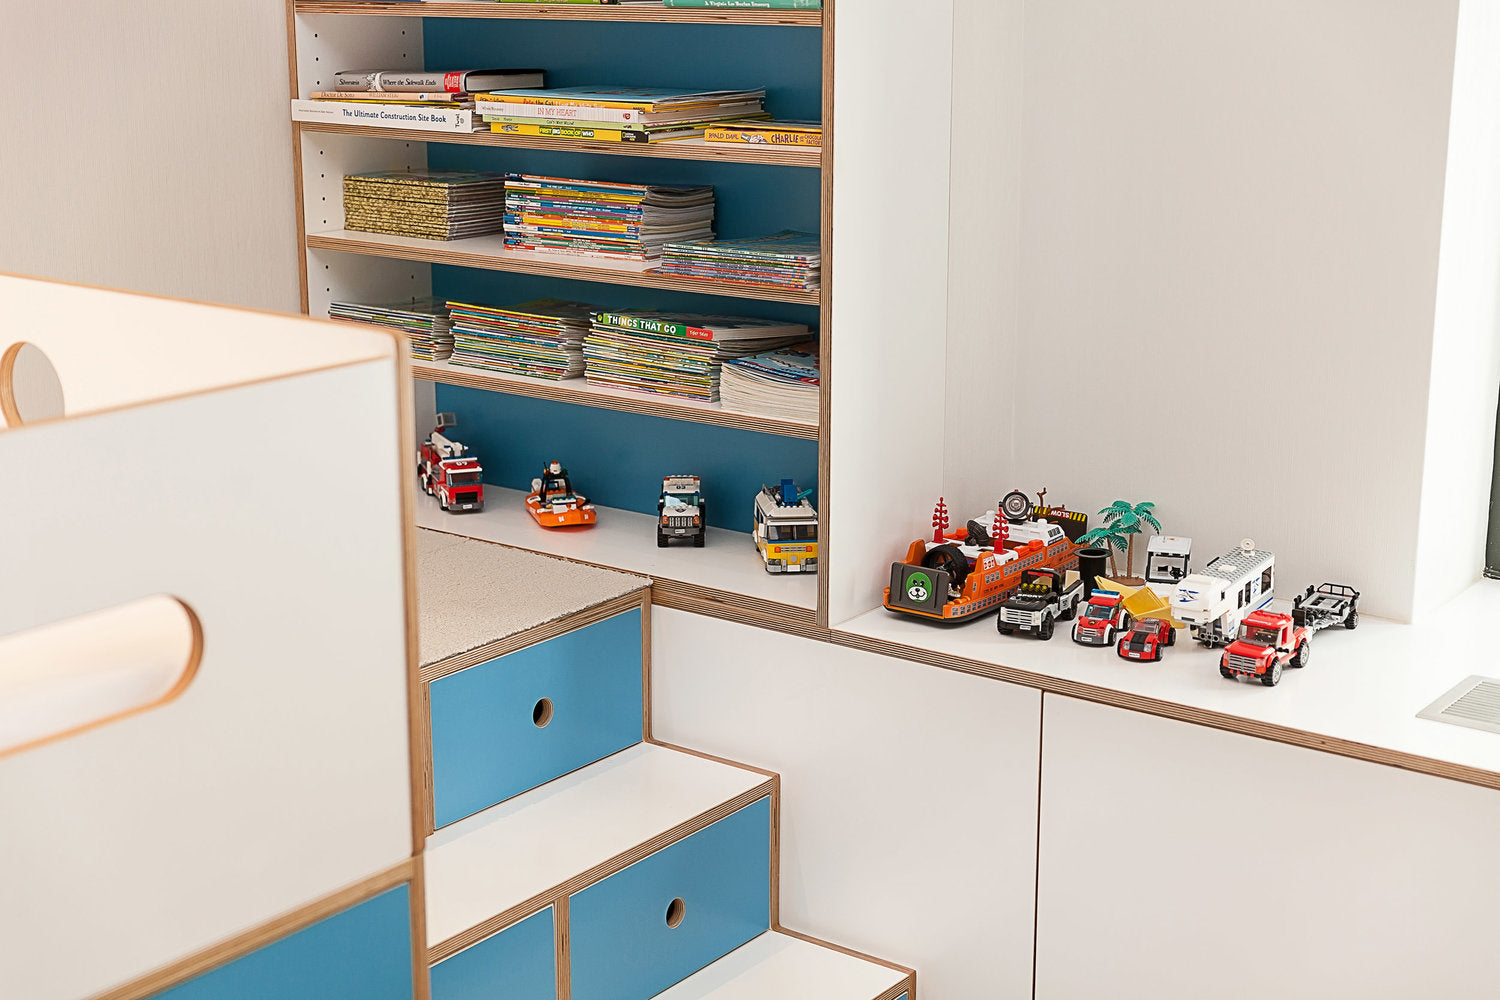 Colorful books and toy vehicles on a bookshelf.